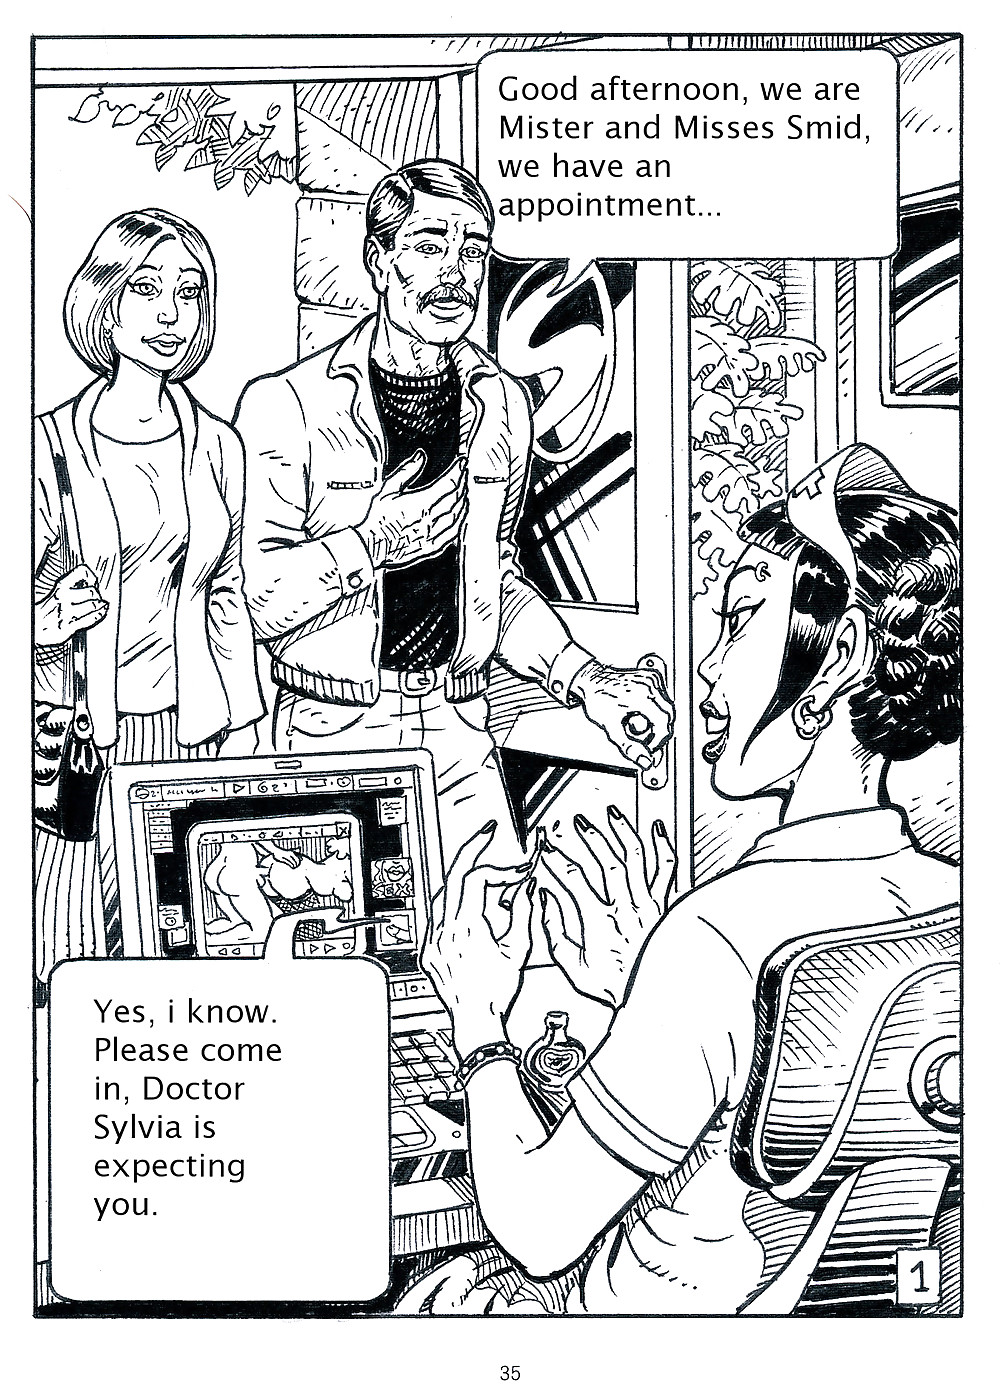 Ts-doctor in drawing 2 #21989147